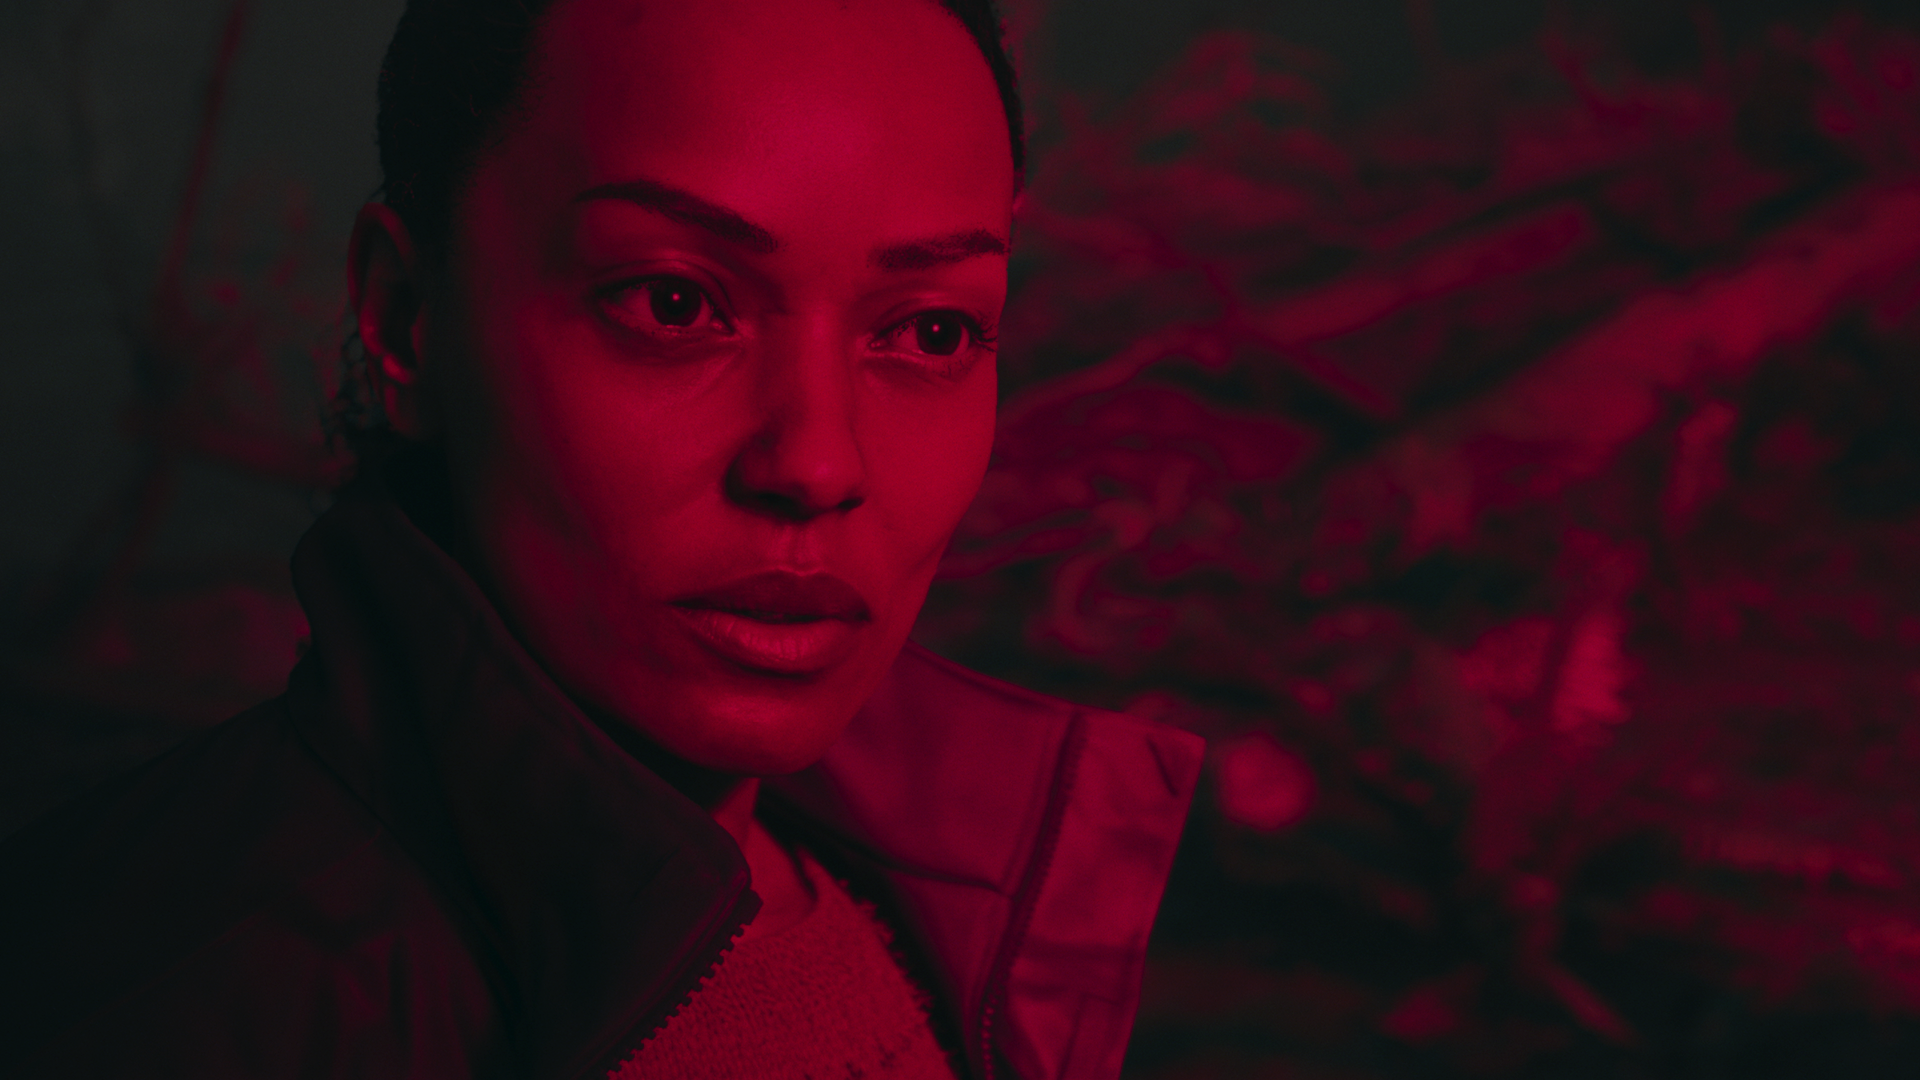 Saga Anderson bathed in red light in Alan Wake 2.